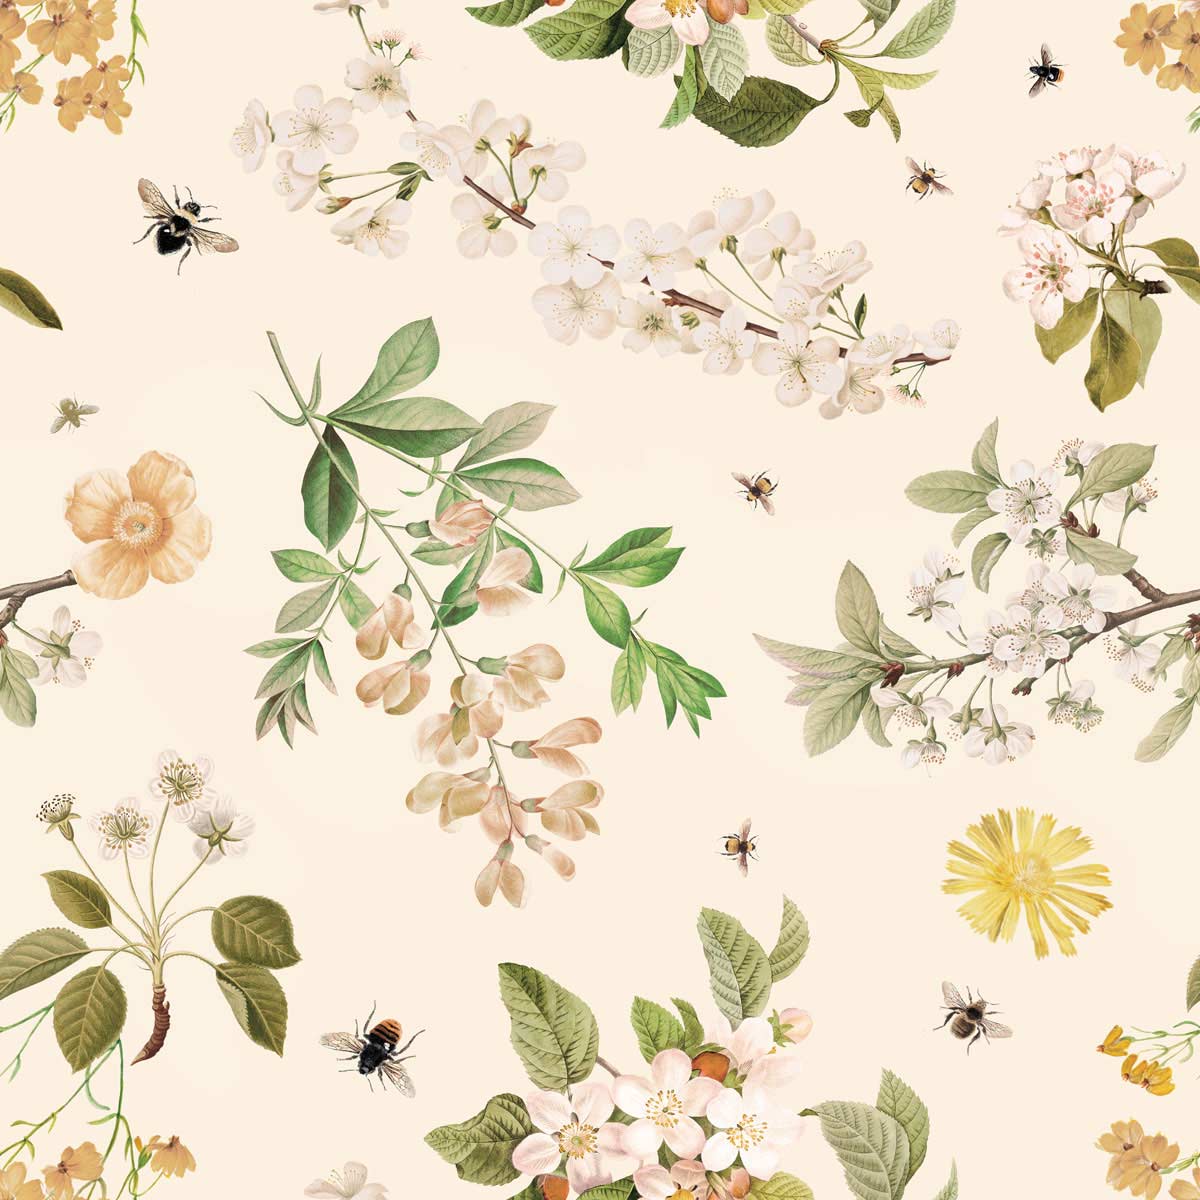 Lovely Bee Orchard Wallpaper.com Wallstickers And Wallpaper Online Store